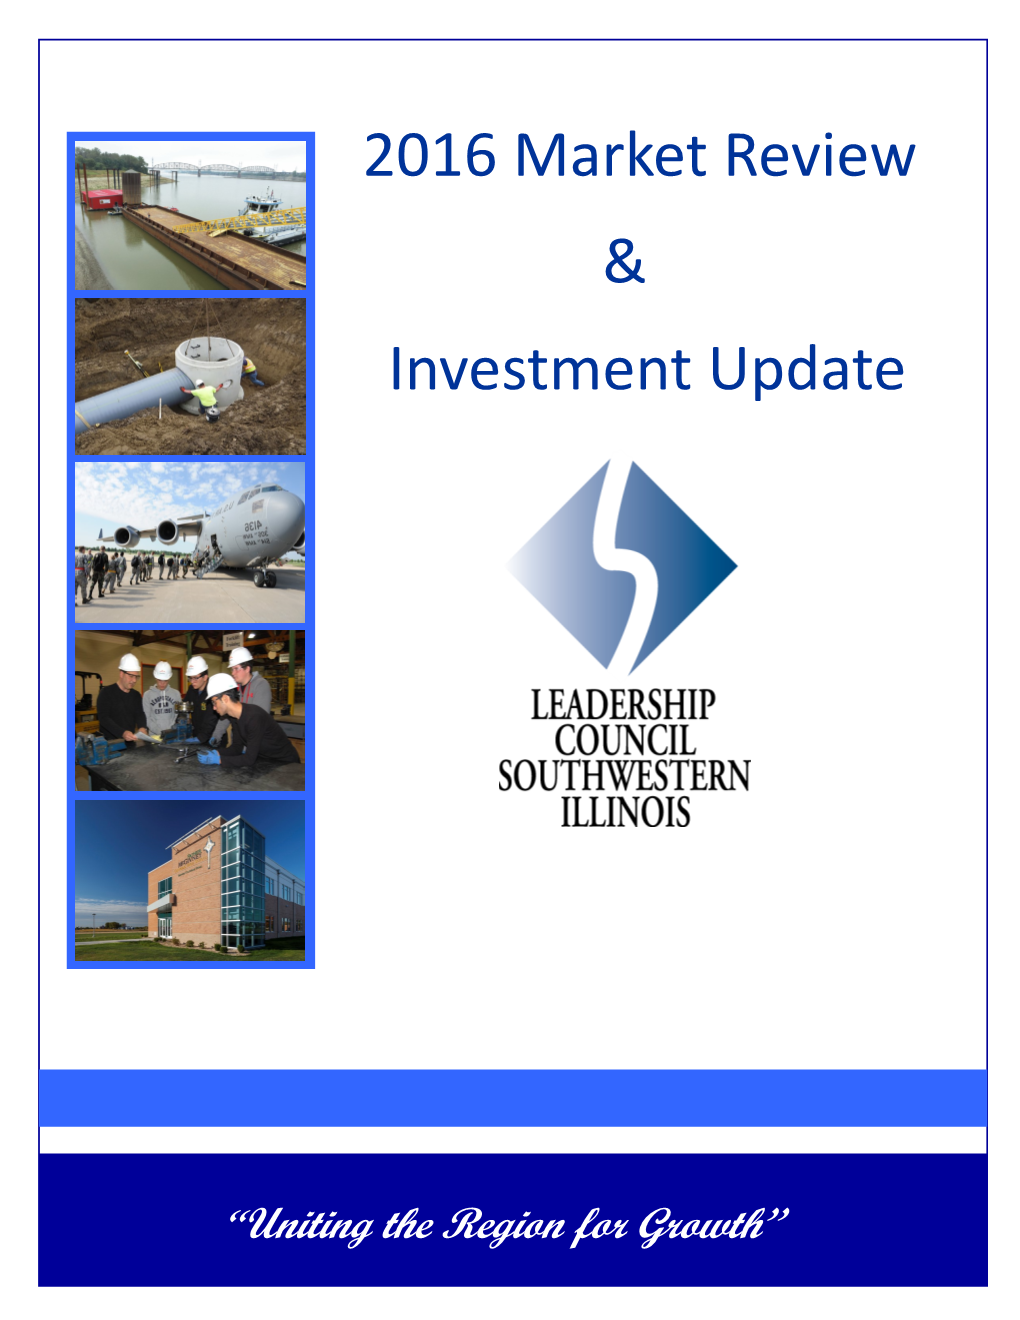 2016 Market Review & Investment Update